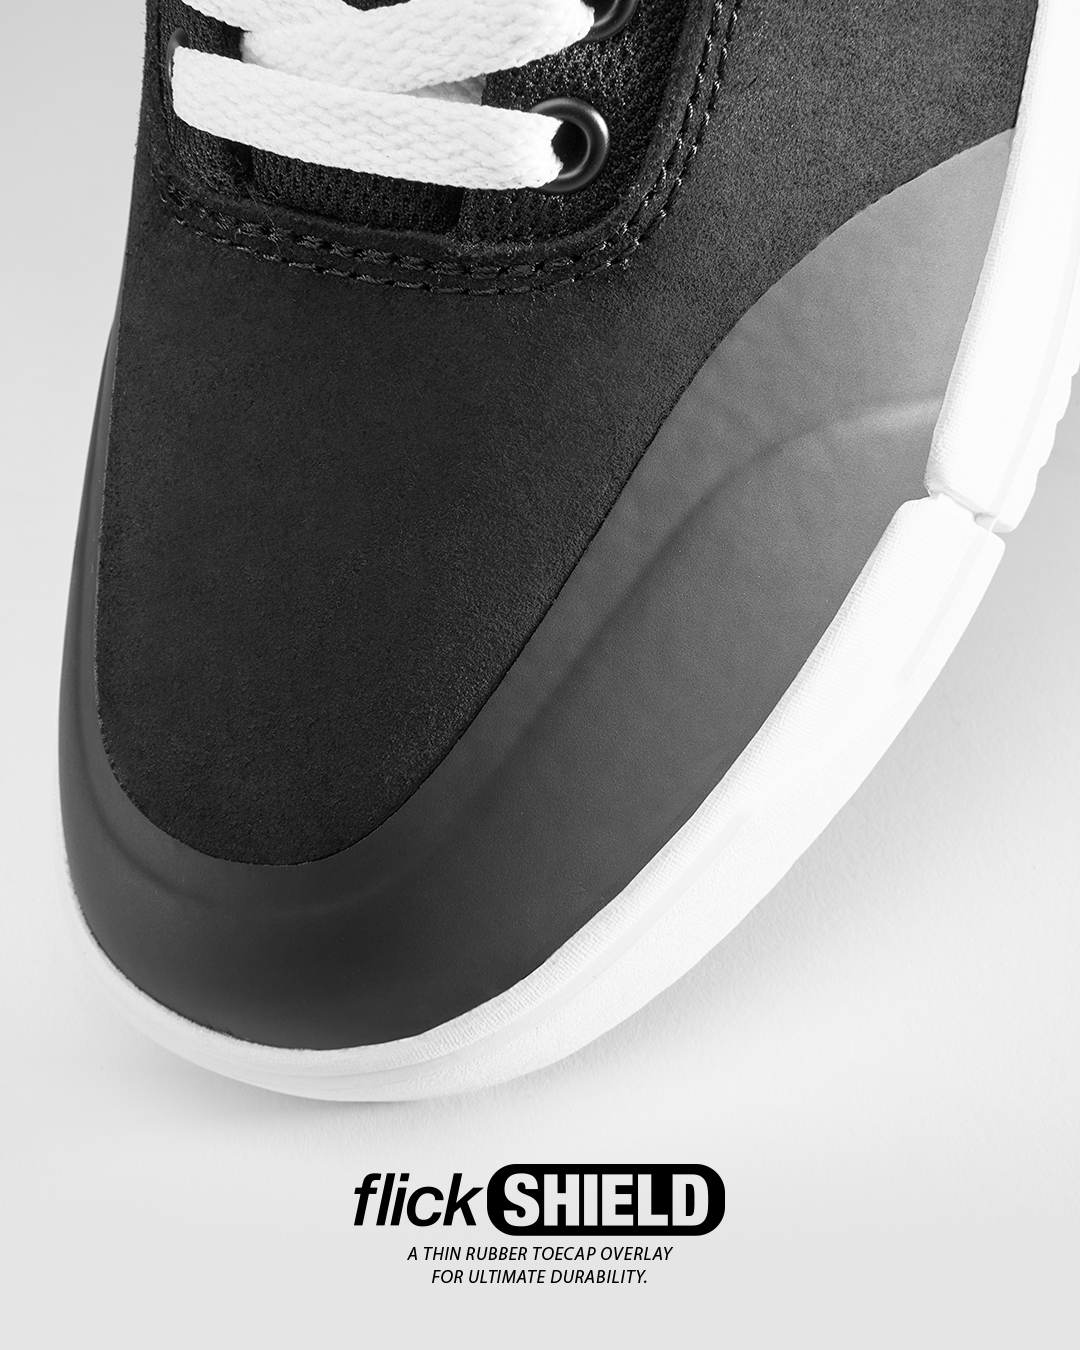 https://emerica.com/collections/footwear/products/phocus-g6-black-white-gold-6101000151-715